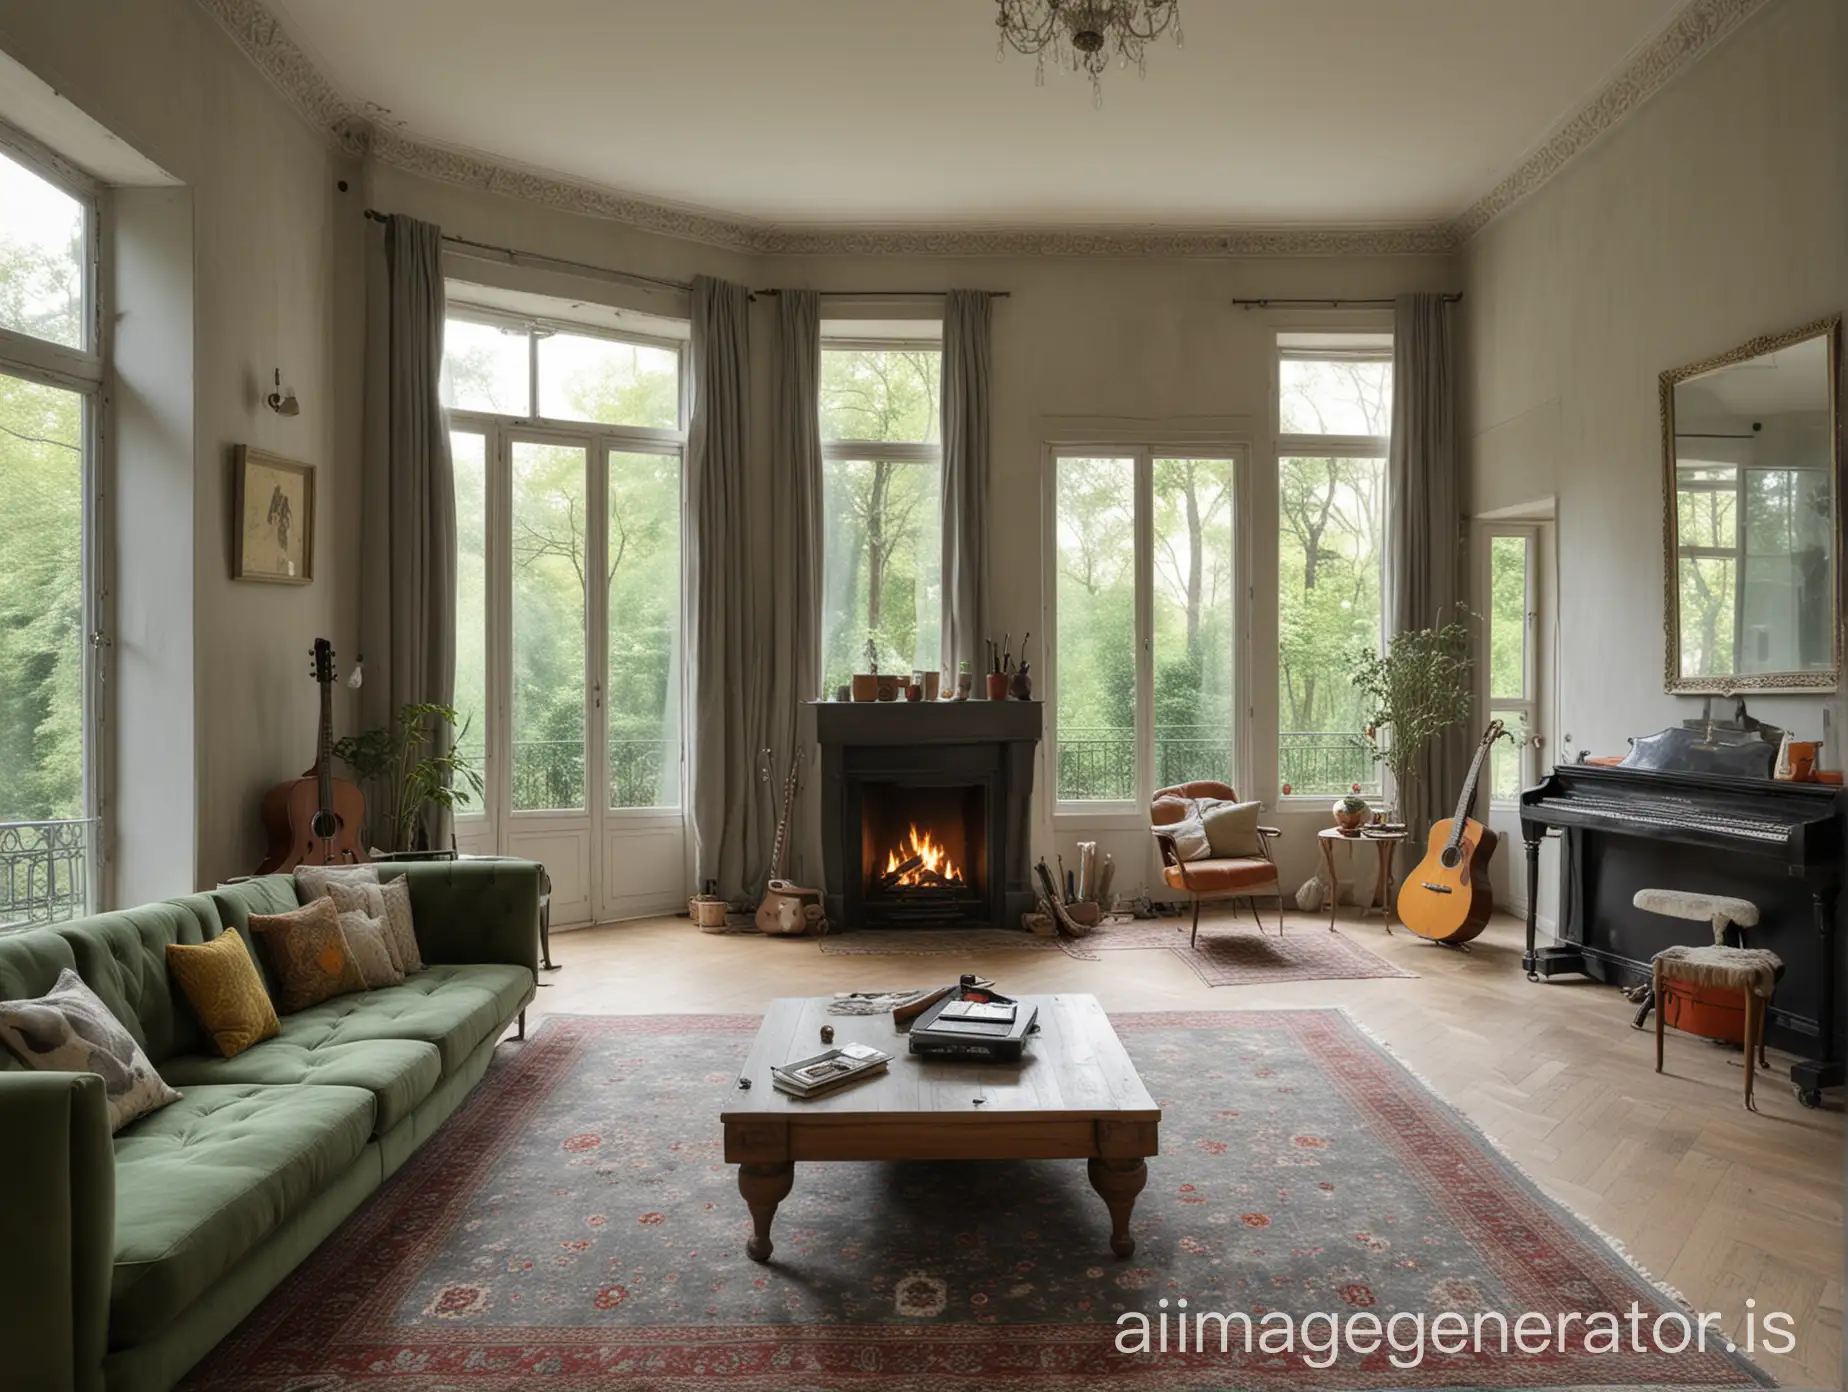 Modern-Living-Room-with-Fireplace-and-Musical-Instruments